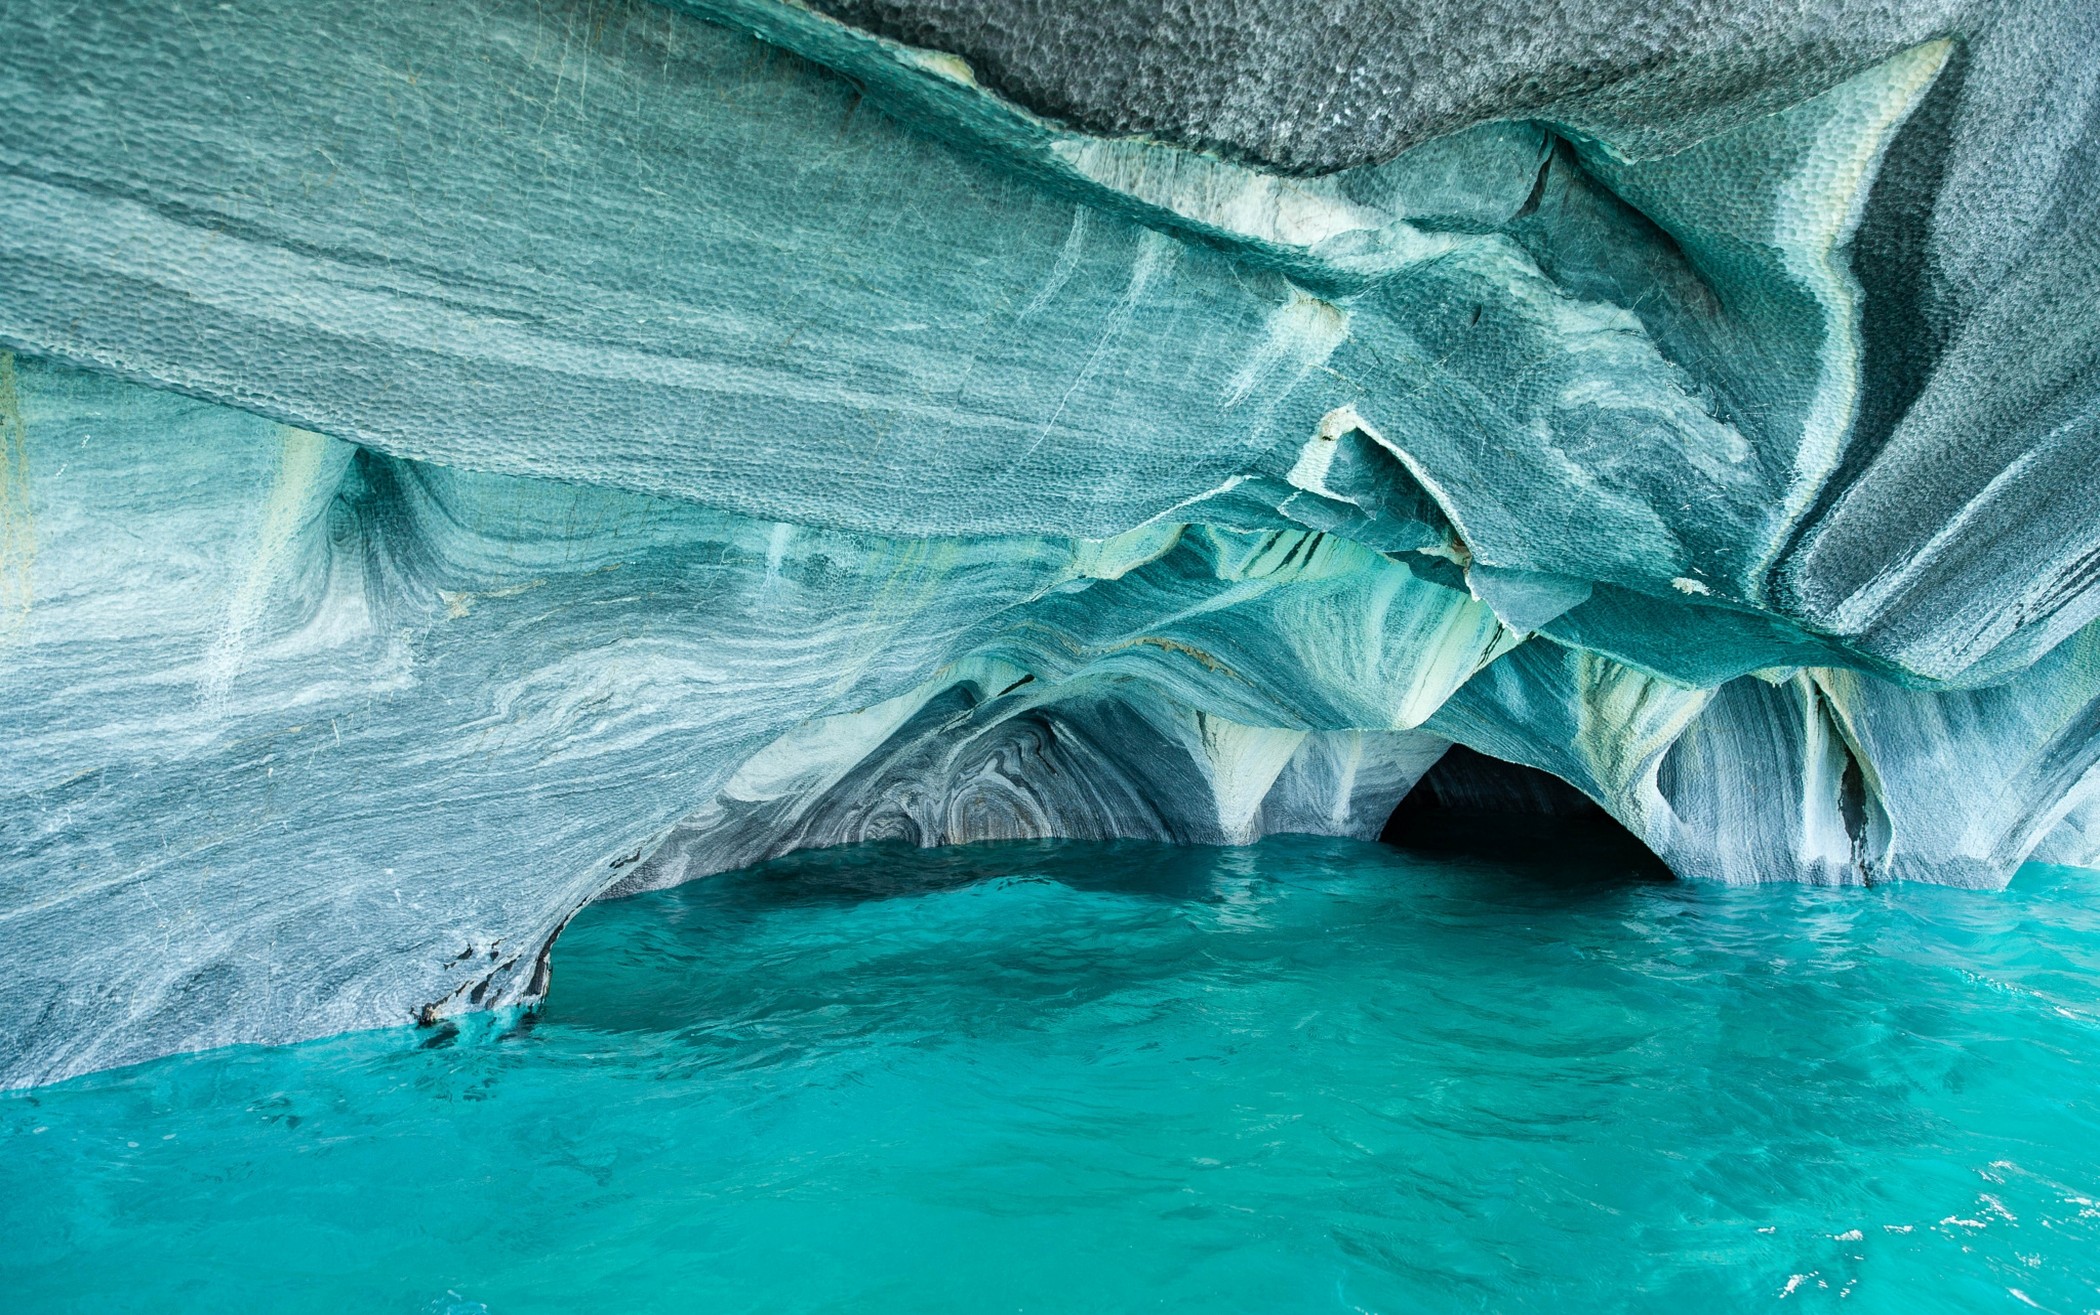 Landscape Nature Chile Lake Rock Erosion Turquoise Water Cave Rock Formation Teal 2100x1315